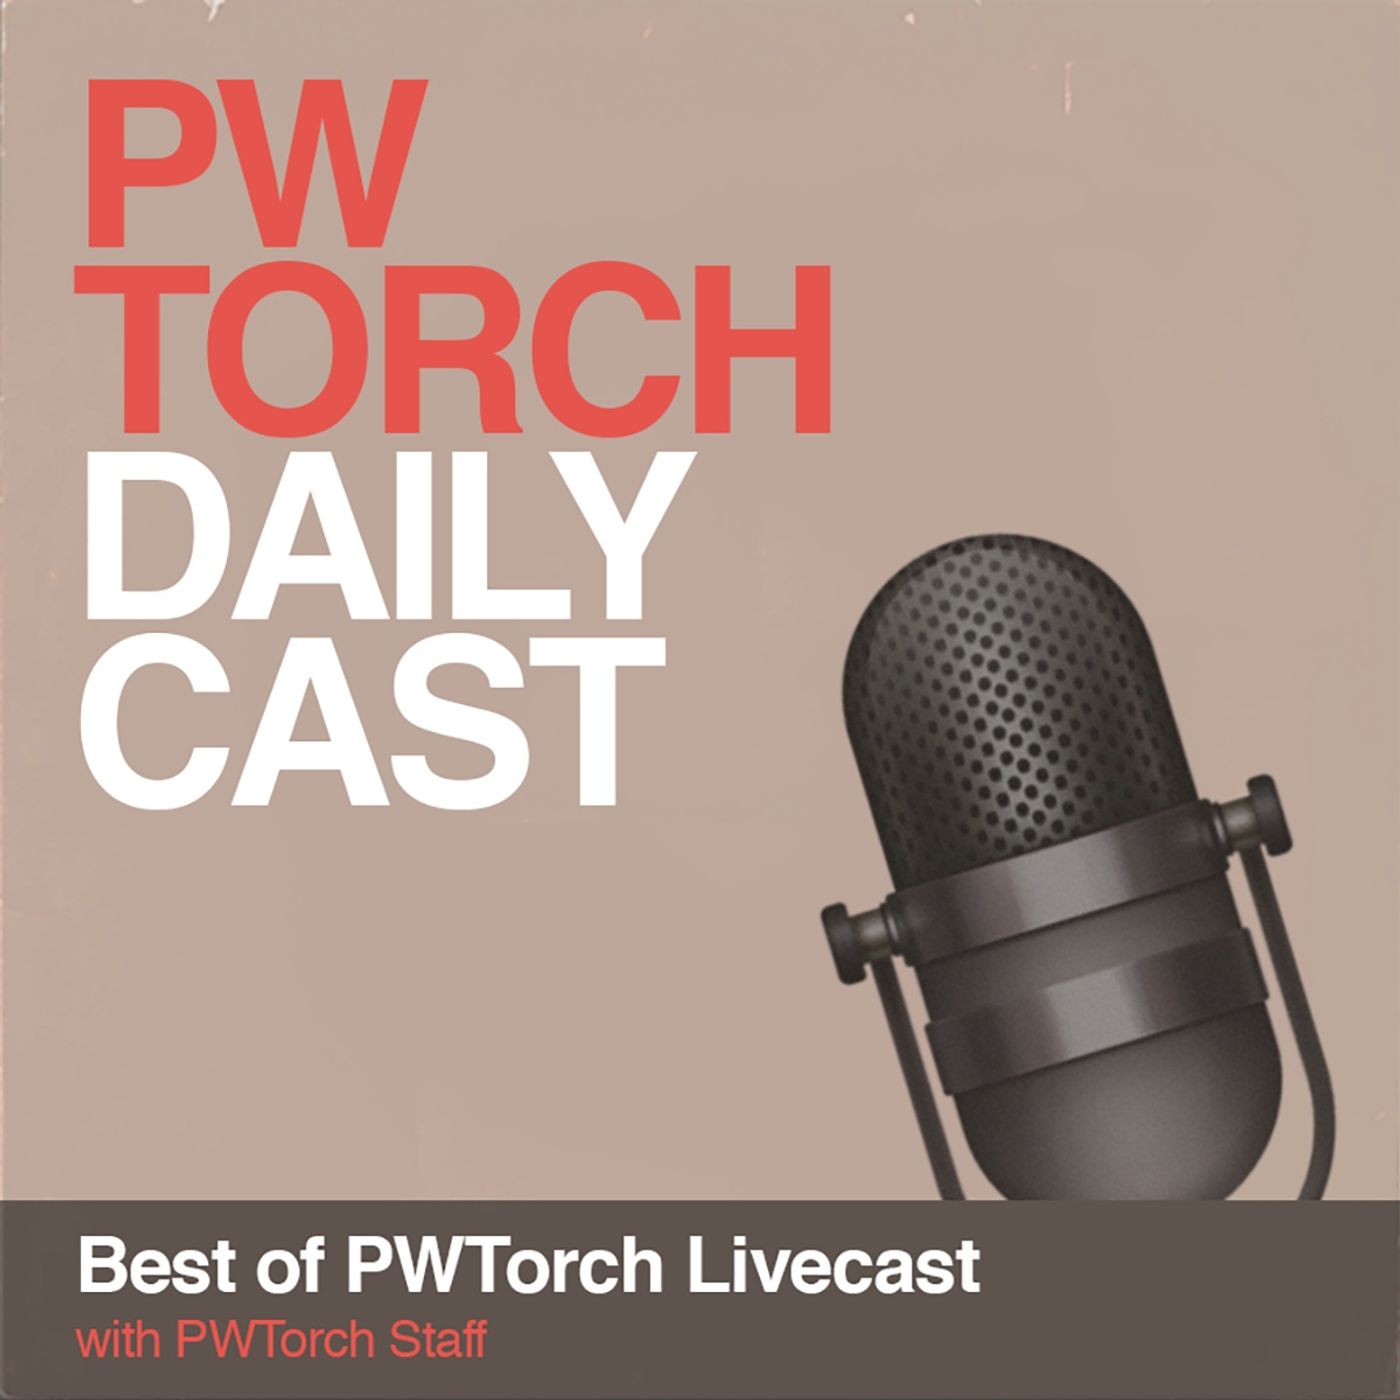 Best of PWTorch Livecast - (2-6-2014) Punk departs WWE, Sting headed to WWE, John Cena becoming a 